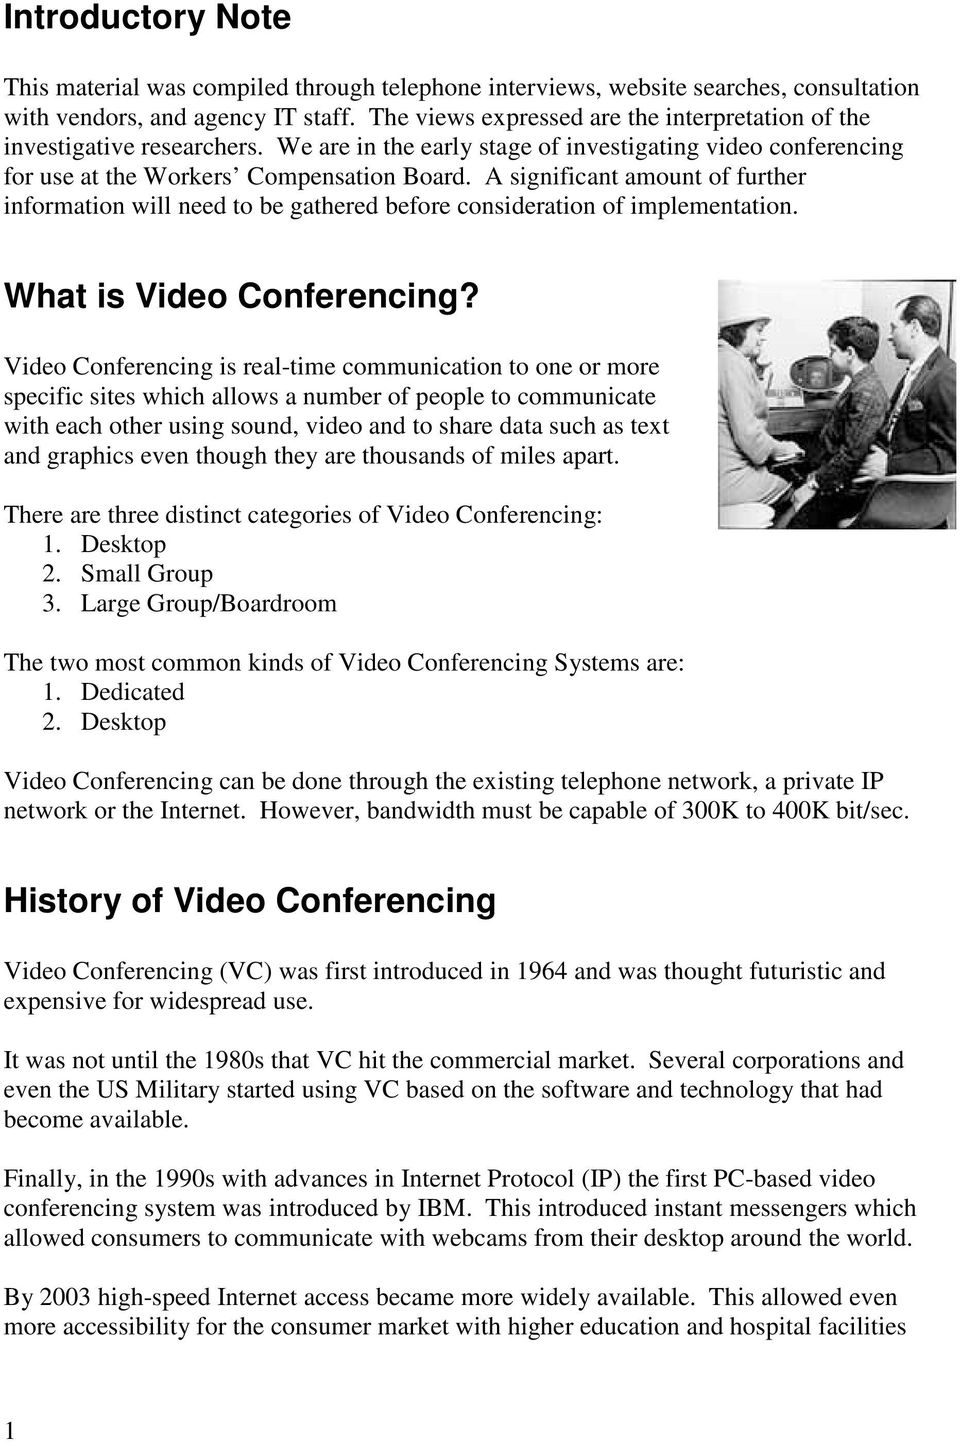 A significant amount of further information will need to be gathered before consideration of implementation. What is Video Conferencing?